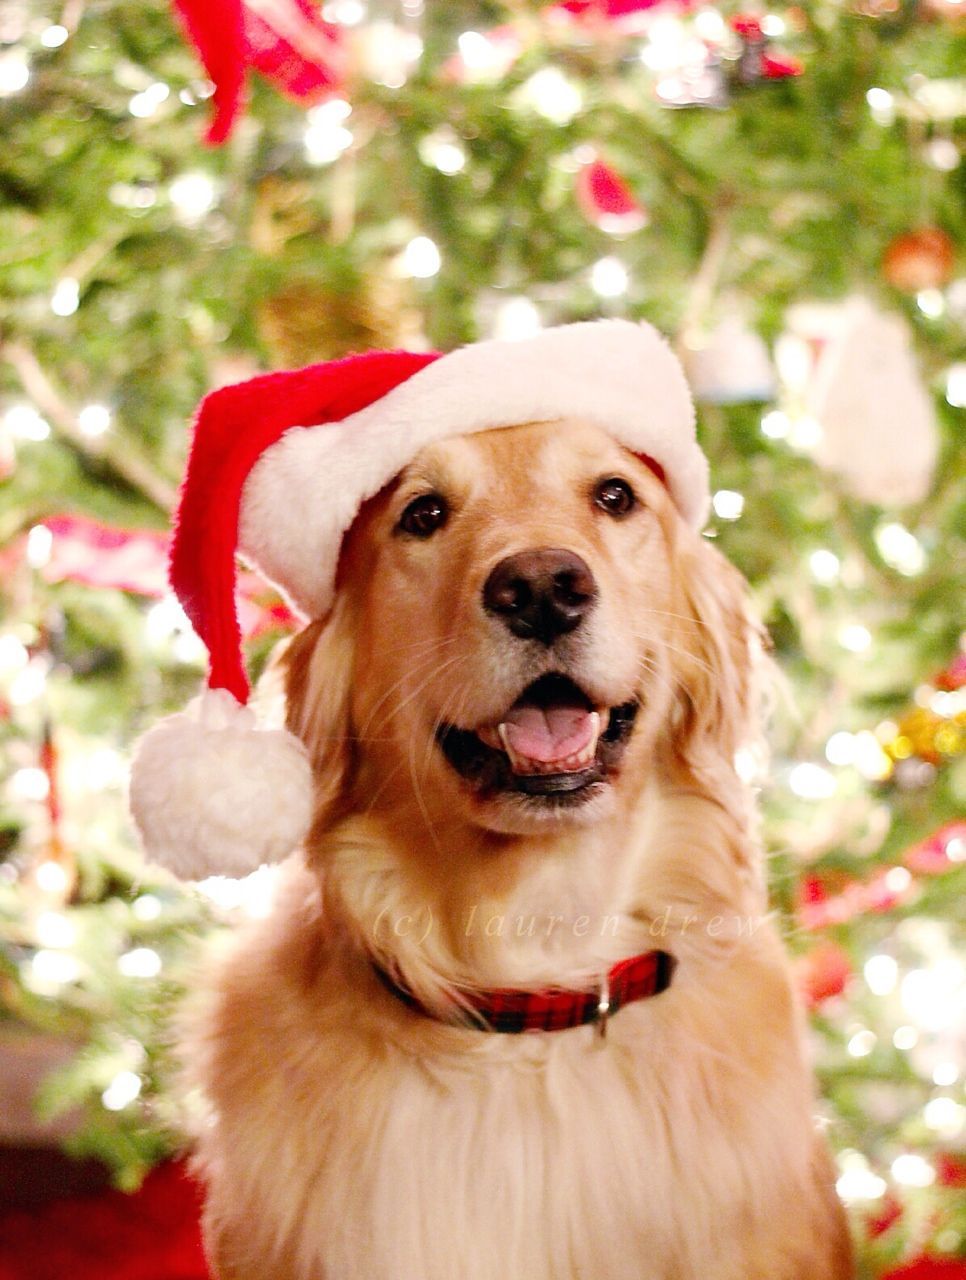 Eleanor MacGuire. Dog christmas picture, Golden retriever christmas, Cute dogs breeds